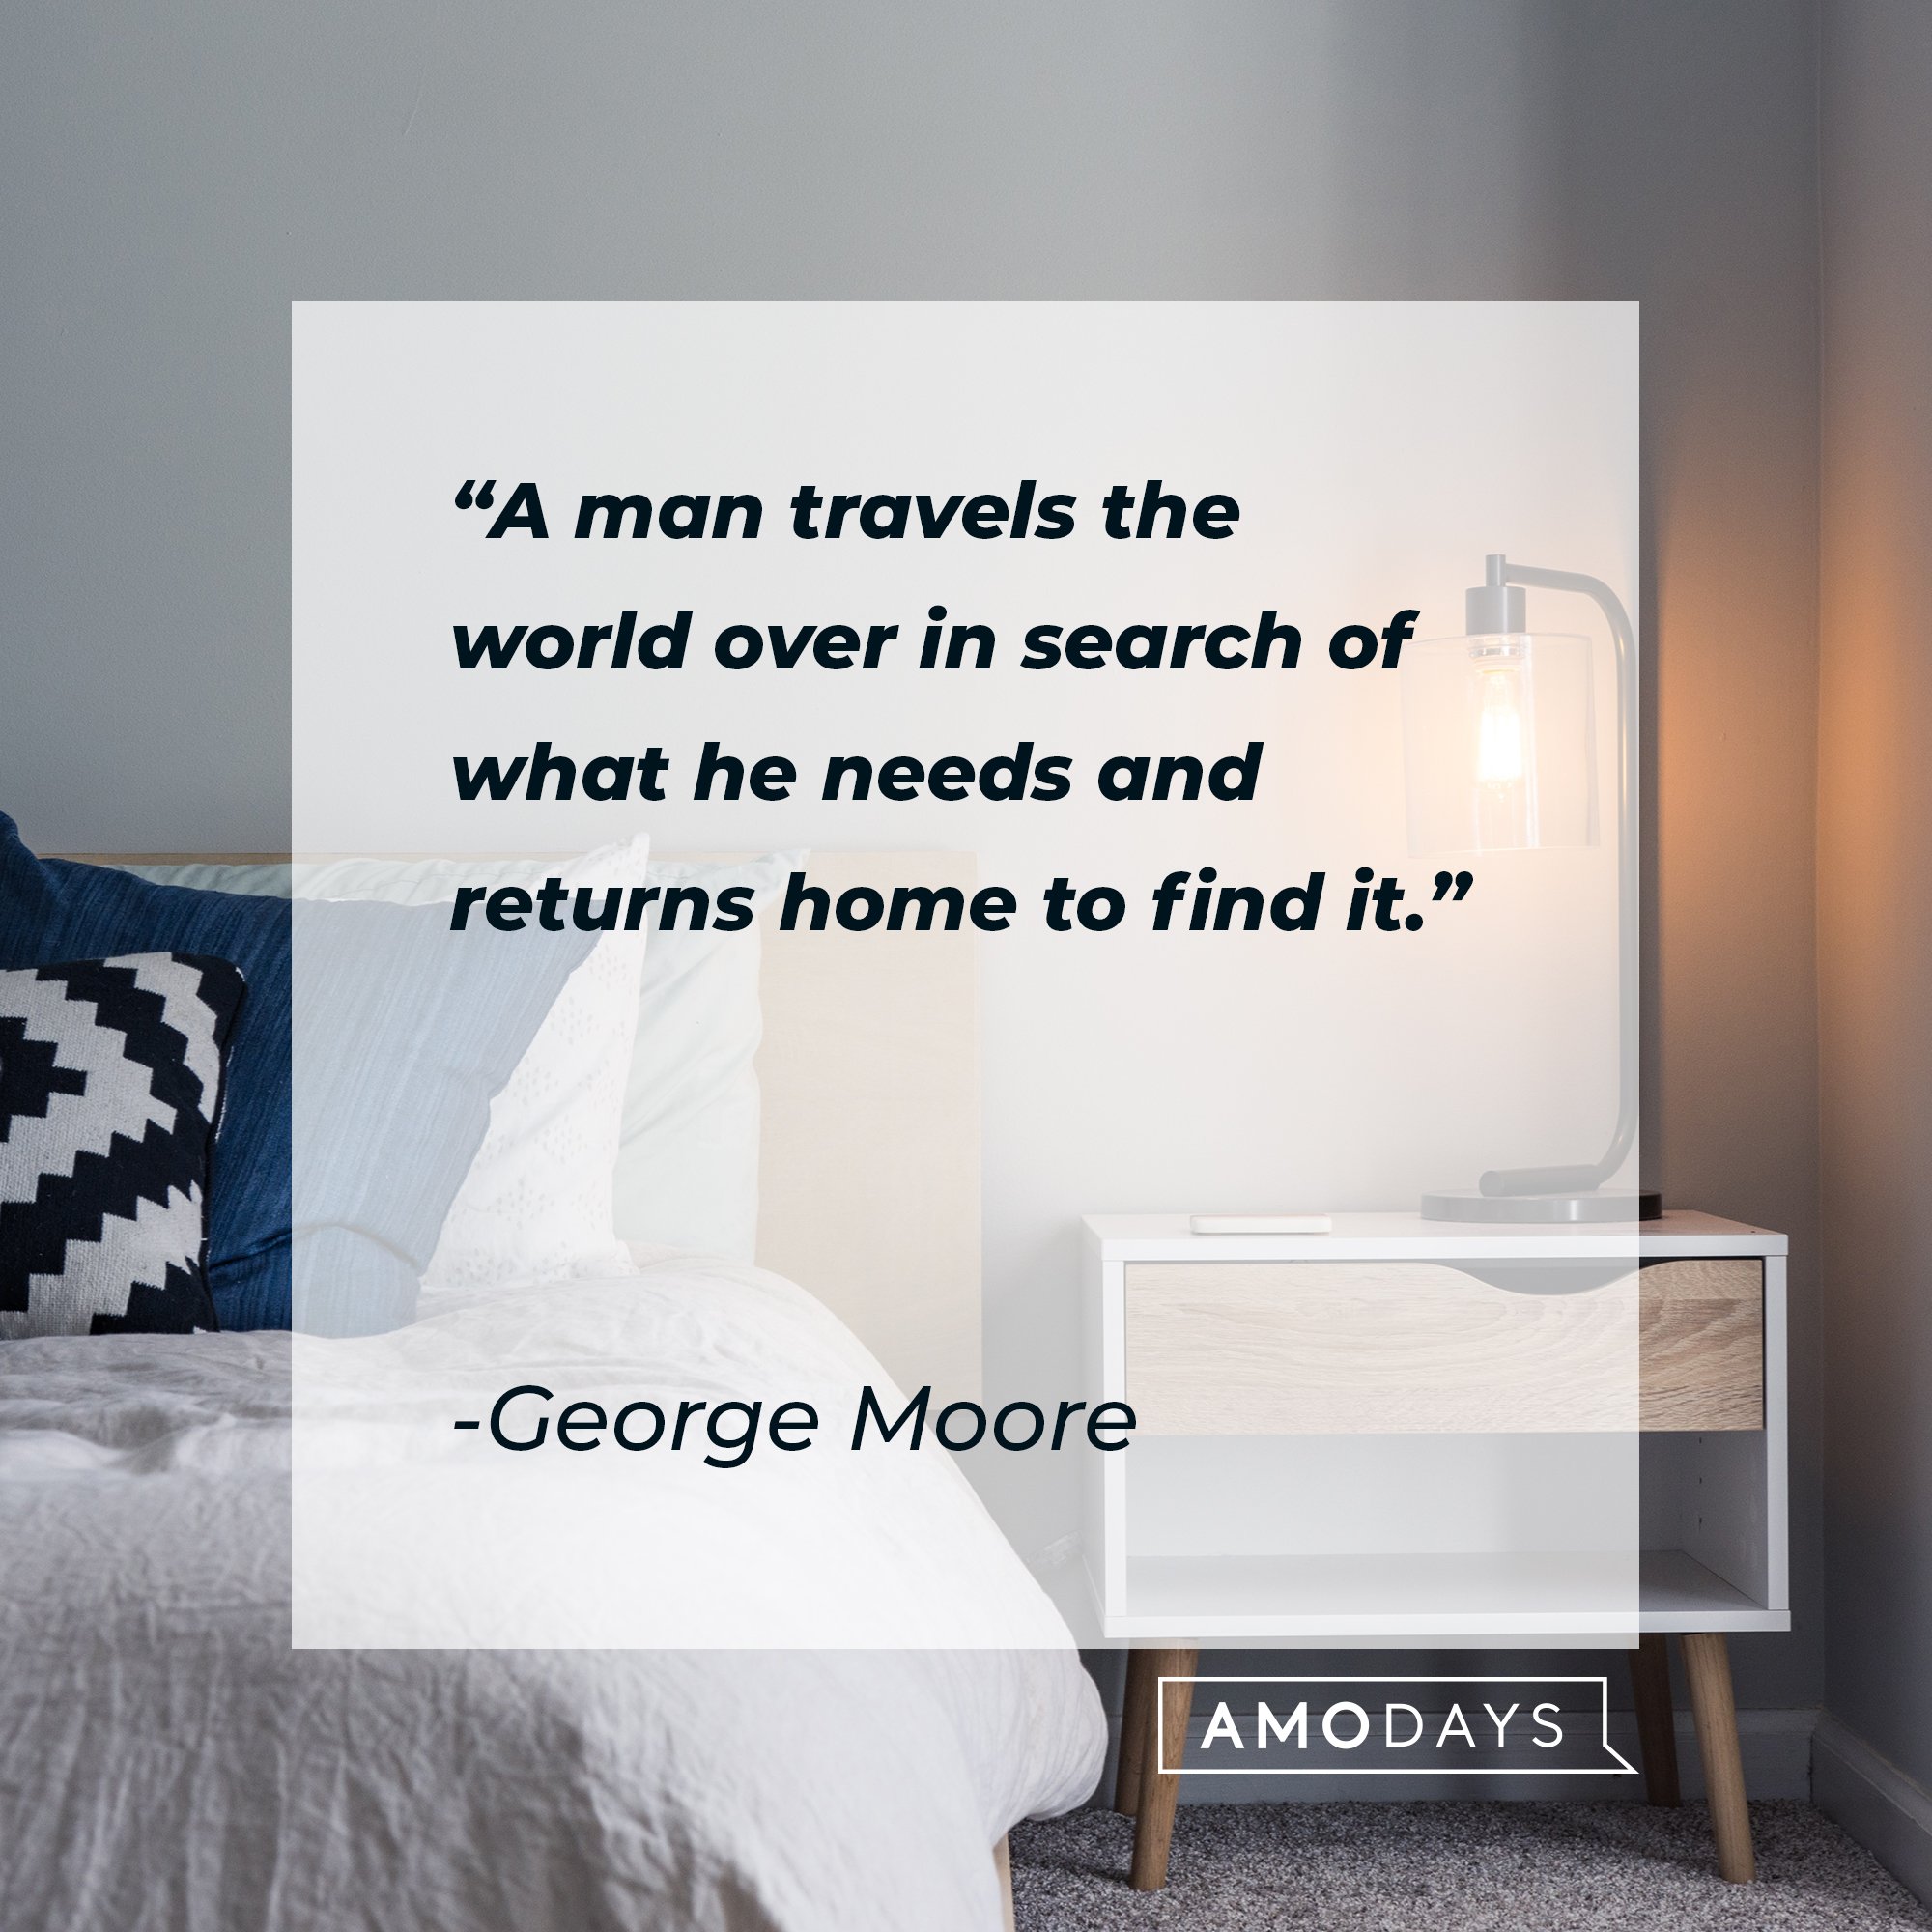 George Moore's quote: "A man travels the world over in search of what he needs and returns home to find it." | Image: AmoDays